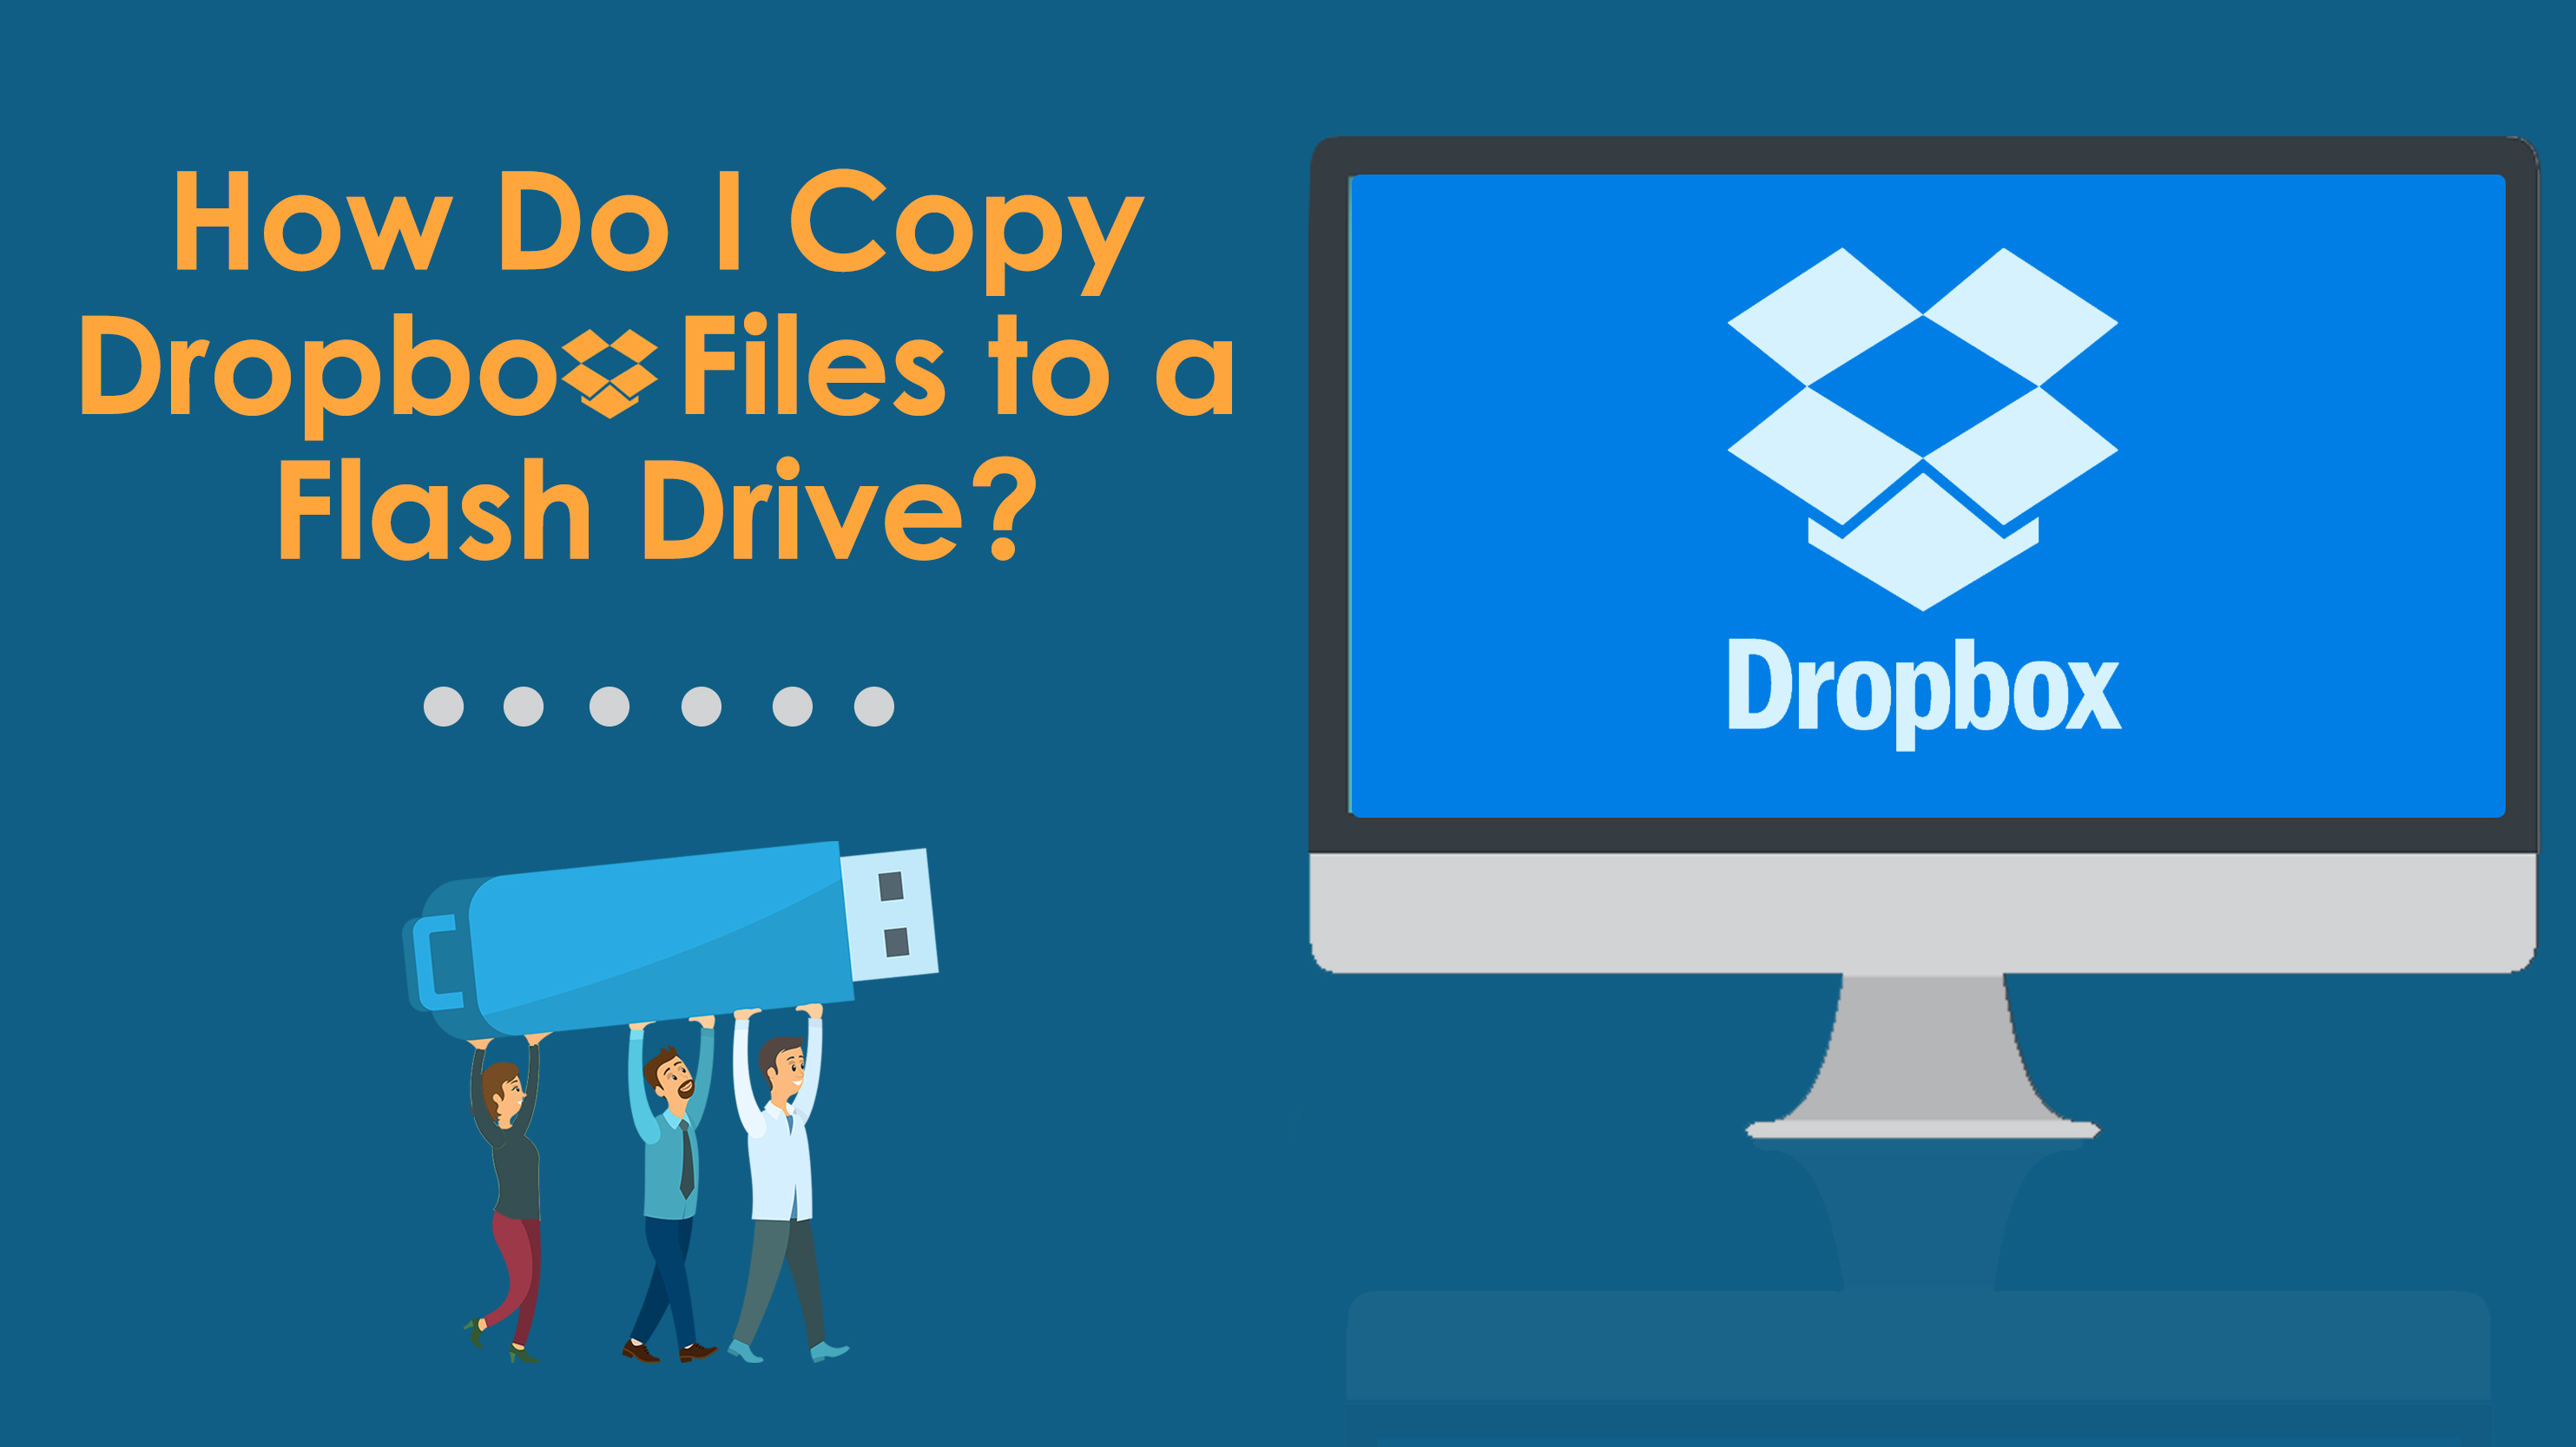 How To Copy Dropbox Files to a Flash Drive